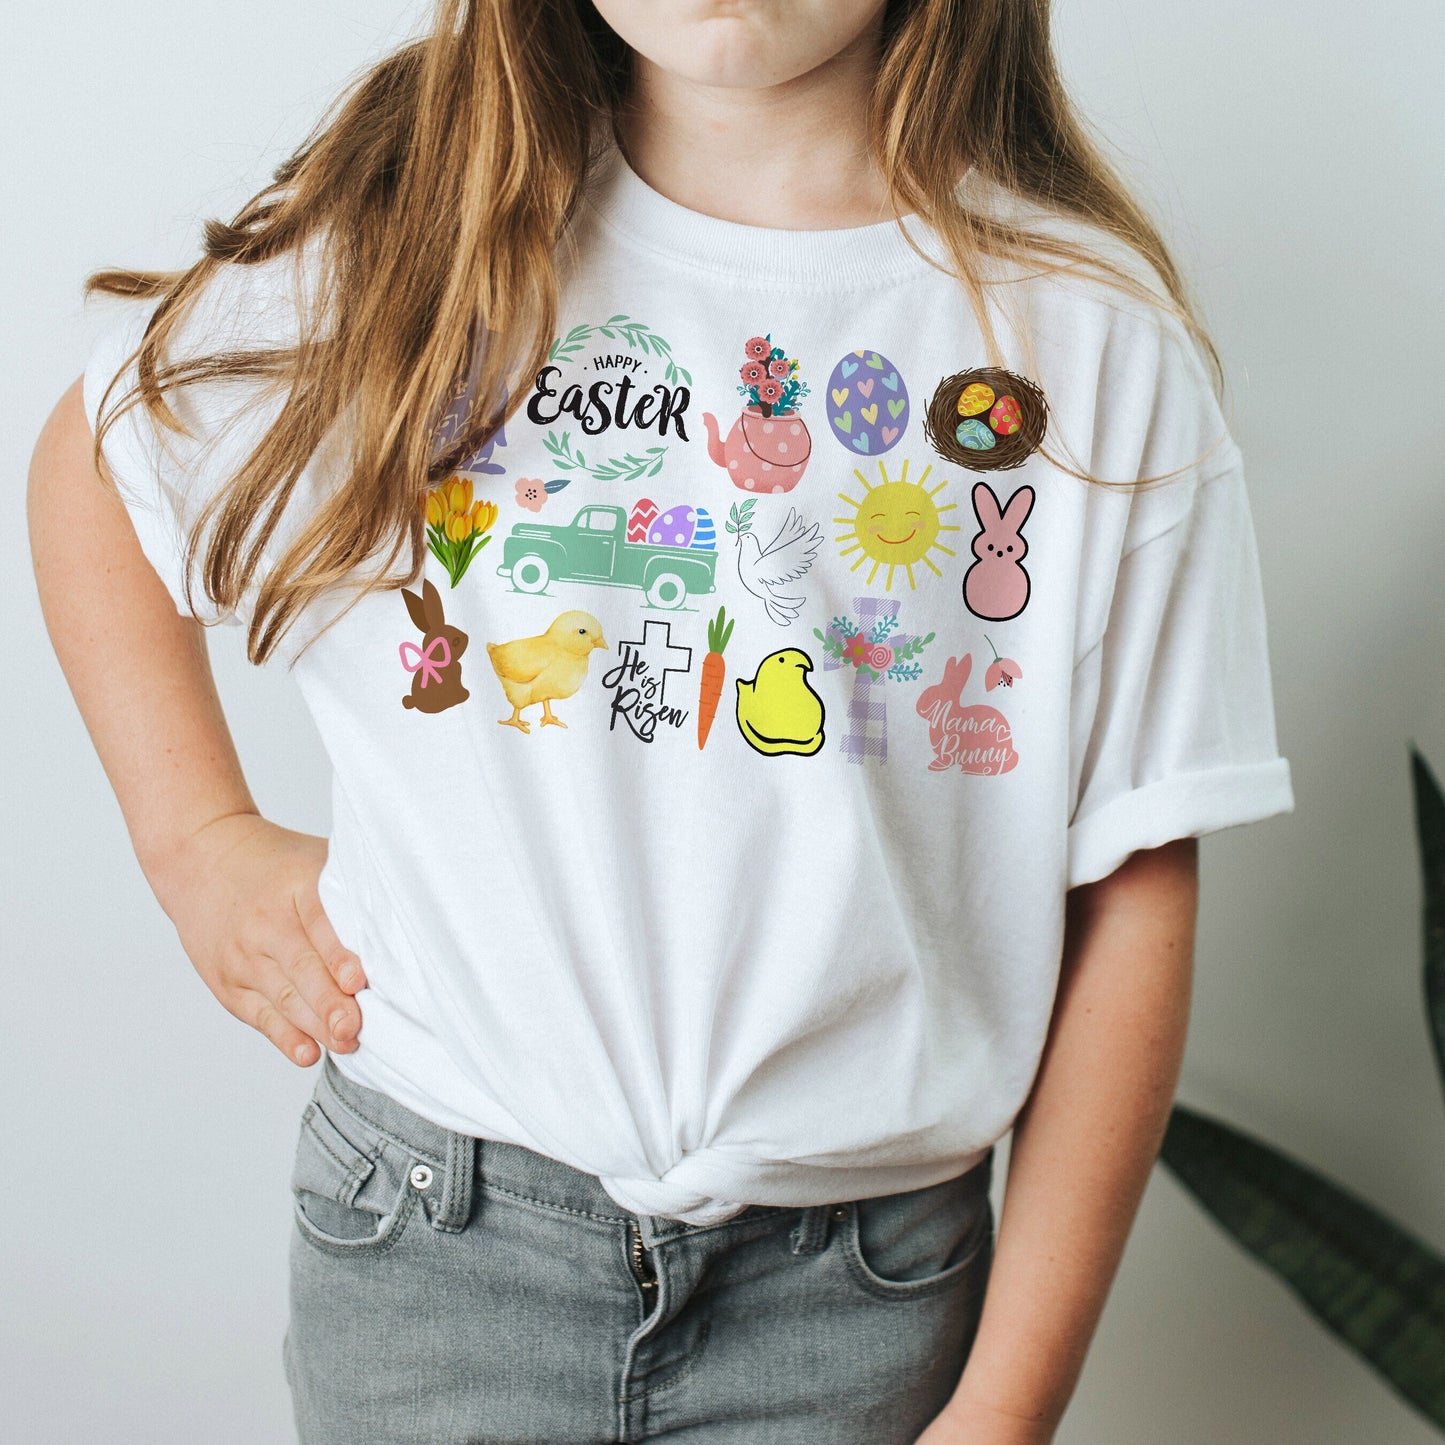 YOUTH | It’s the Little Things | Happy Easter & Bunny Rabbit Love Day | UNISEX Relaxed Jersey T-Shirt for Youth boys or Girls